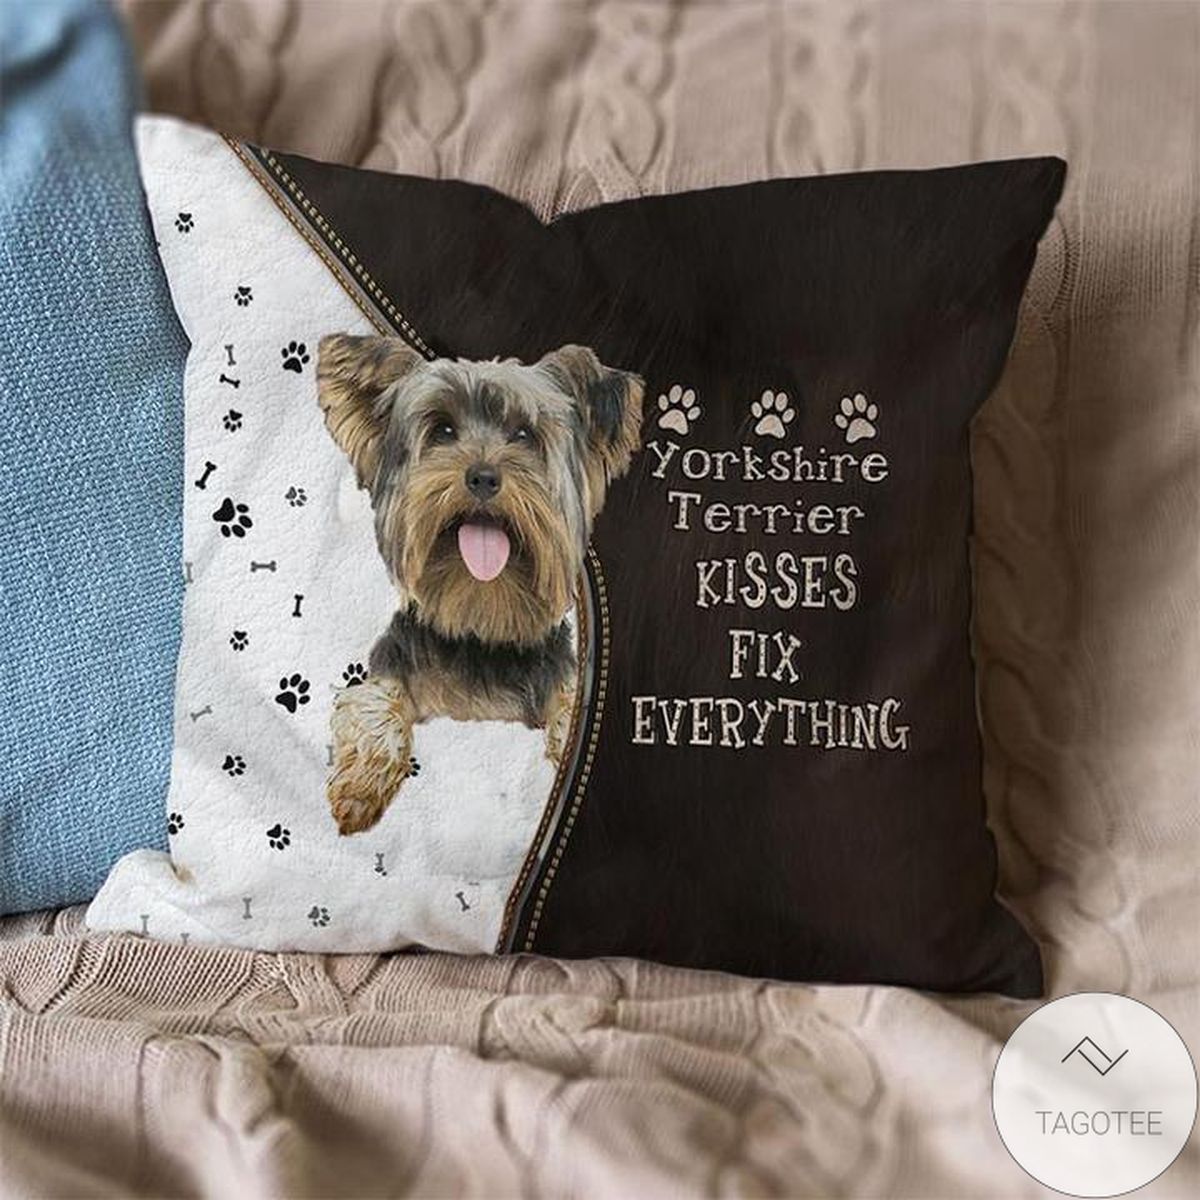 Yorkshire Terrier Kisses Fix Everything Pillowcase